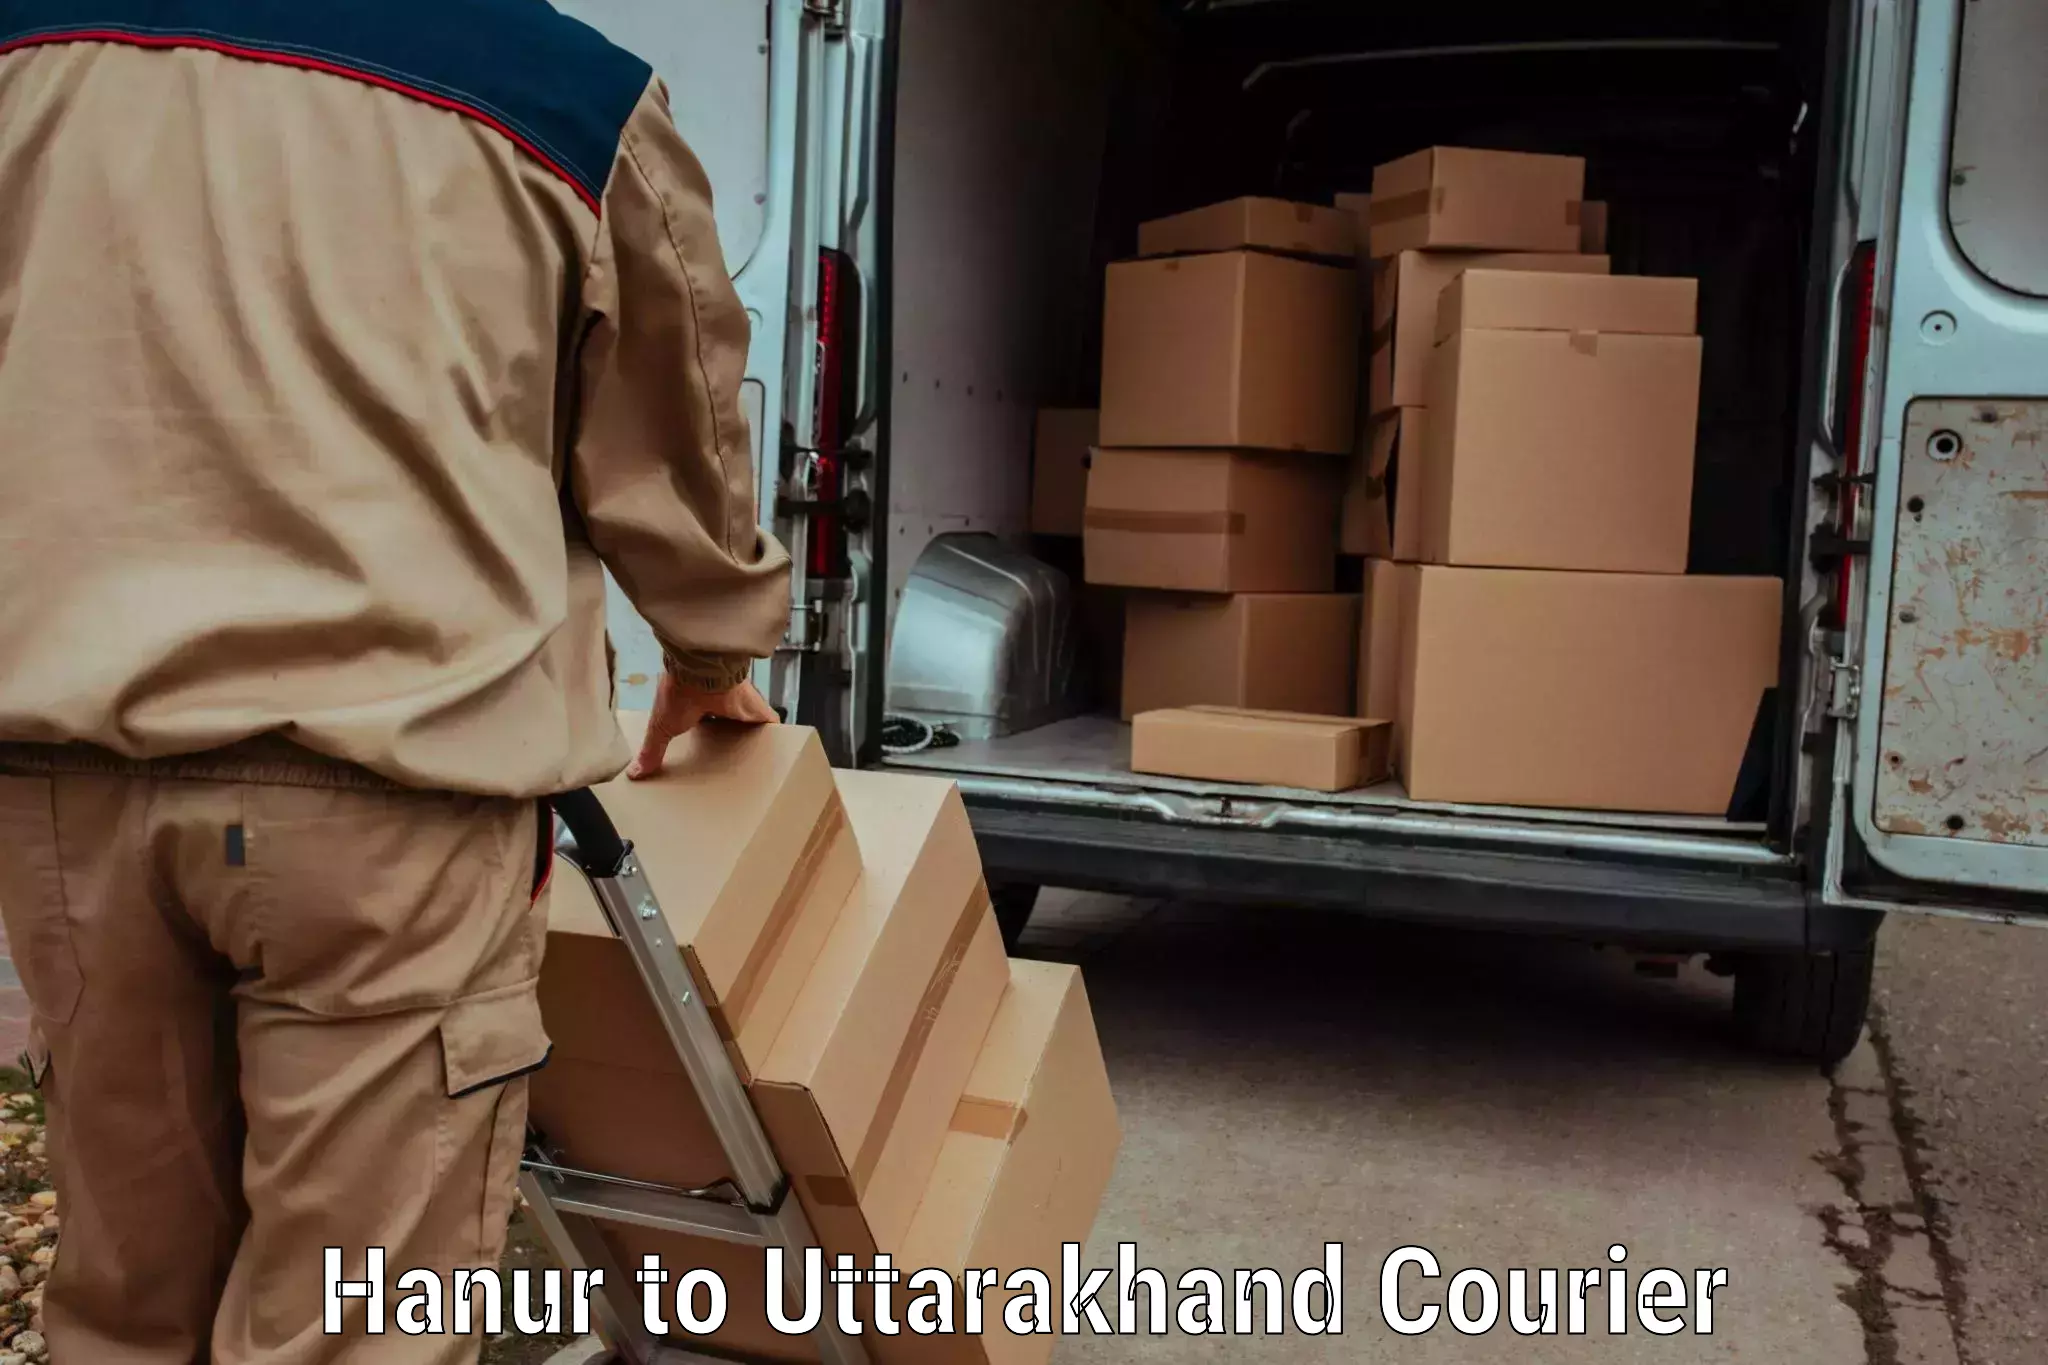 Multi-national courier services Hanur to Rudrapur